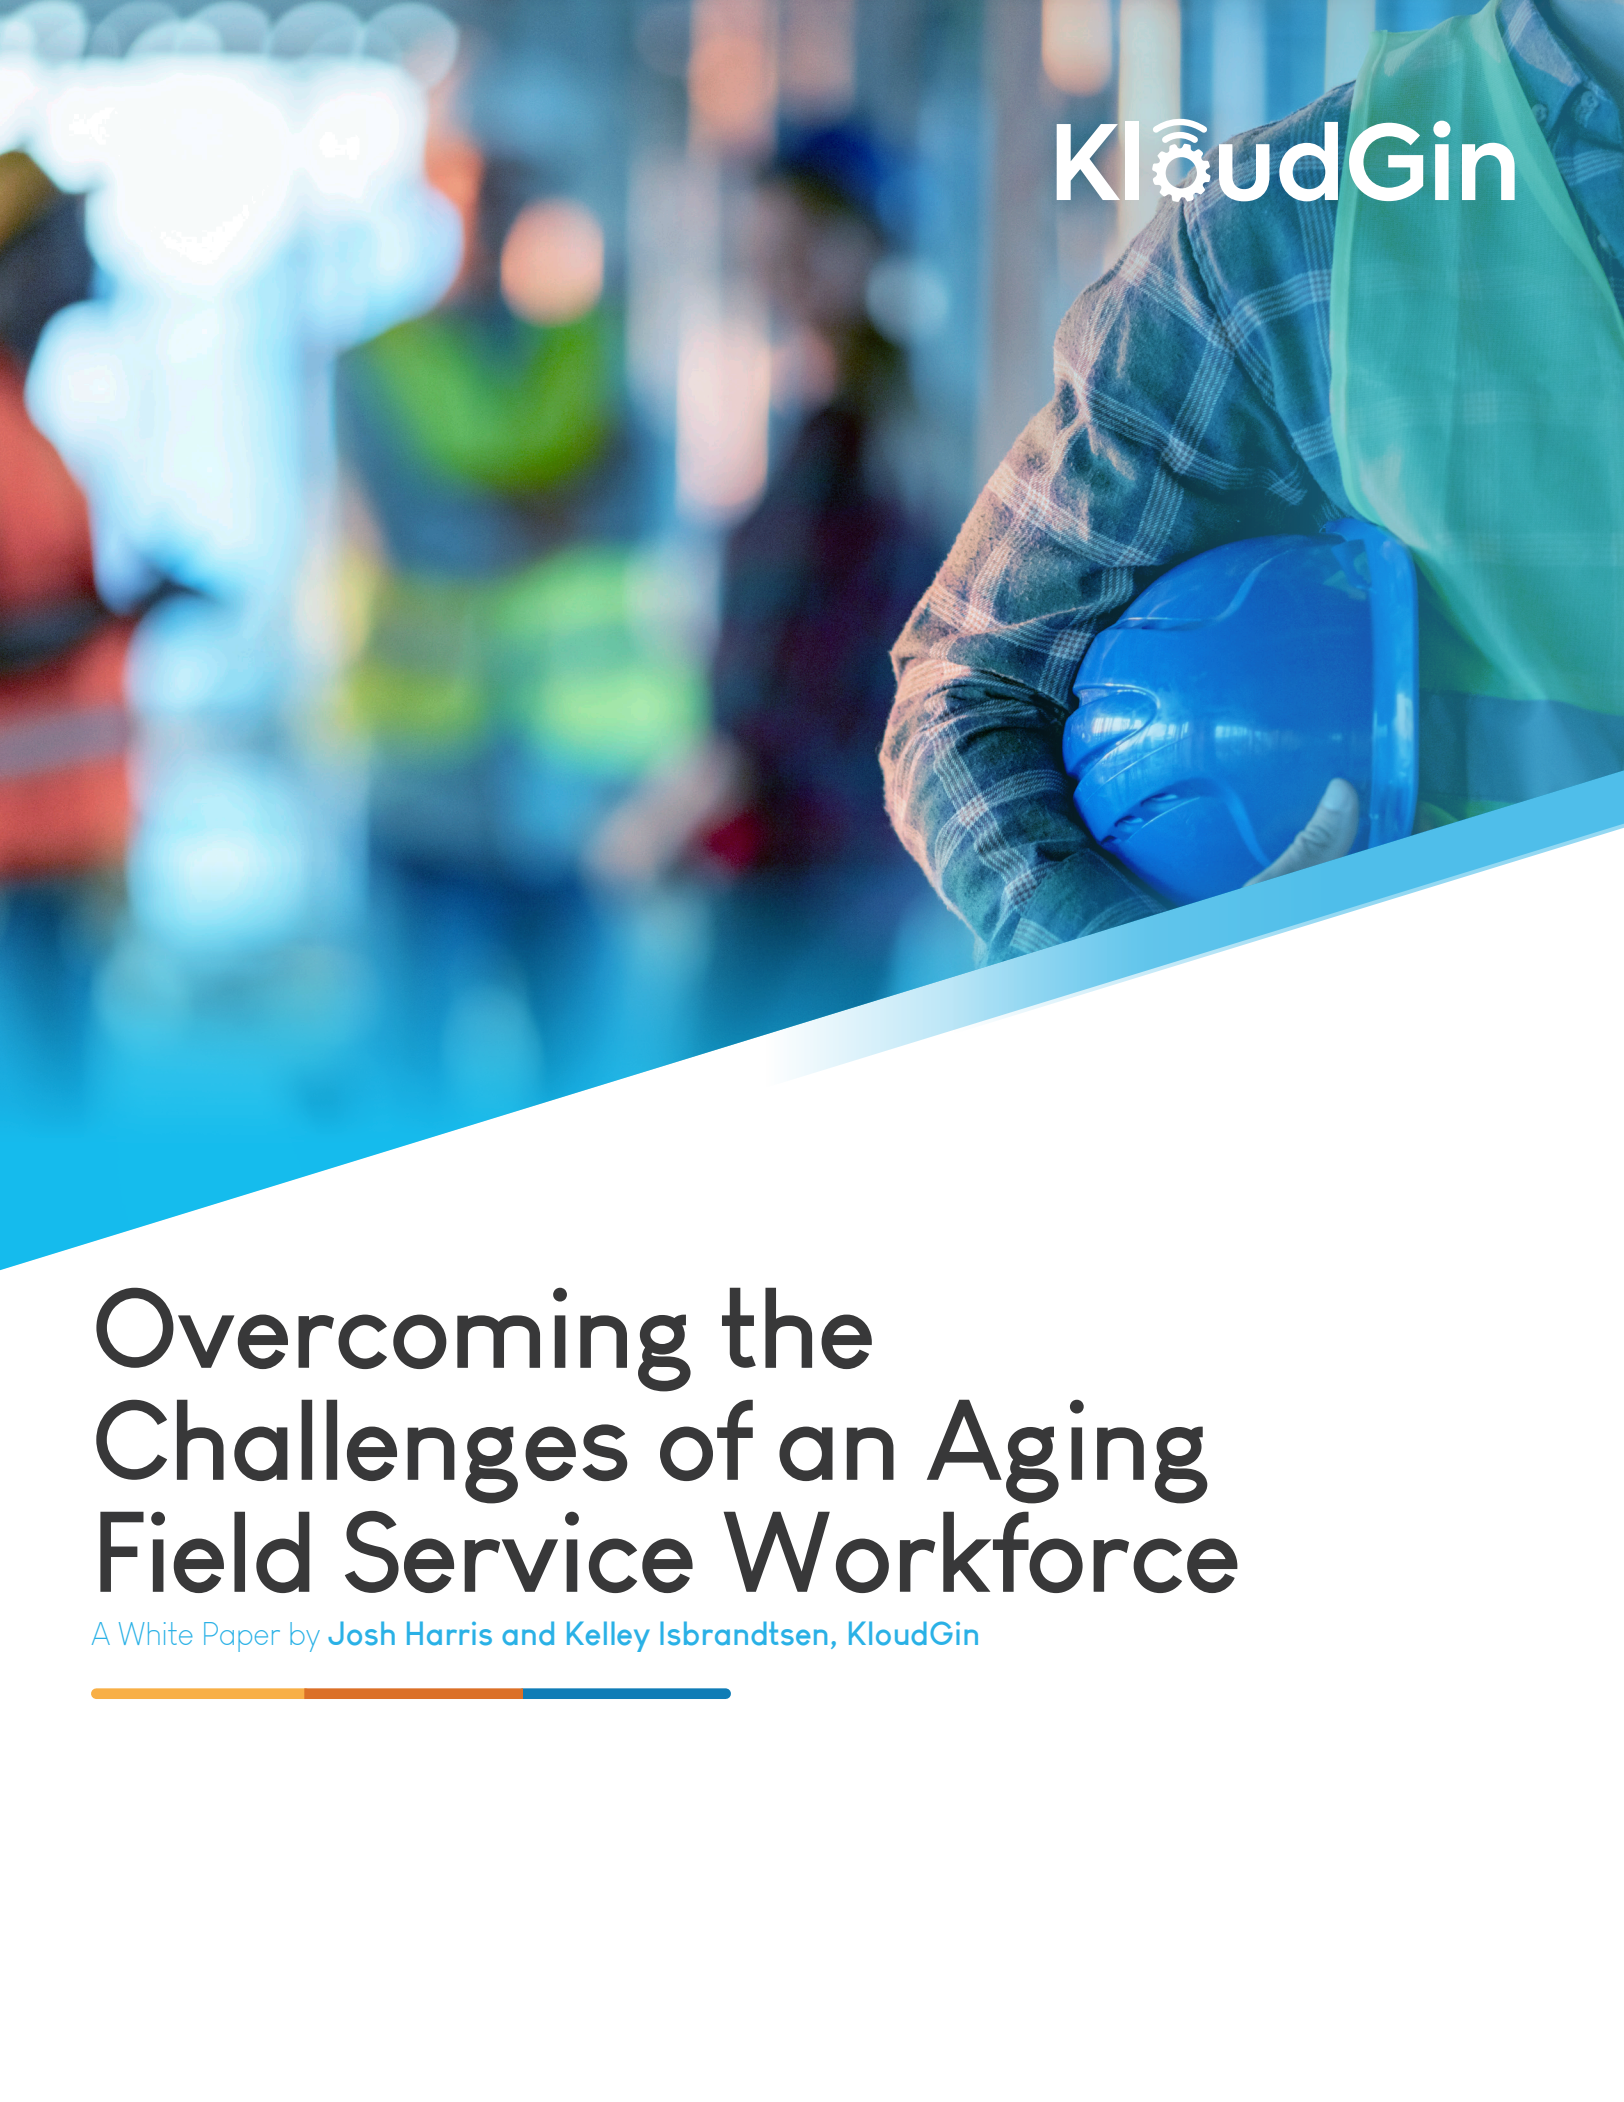 Overcoming challenges of an aging filed service workforce